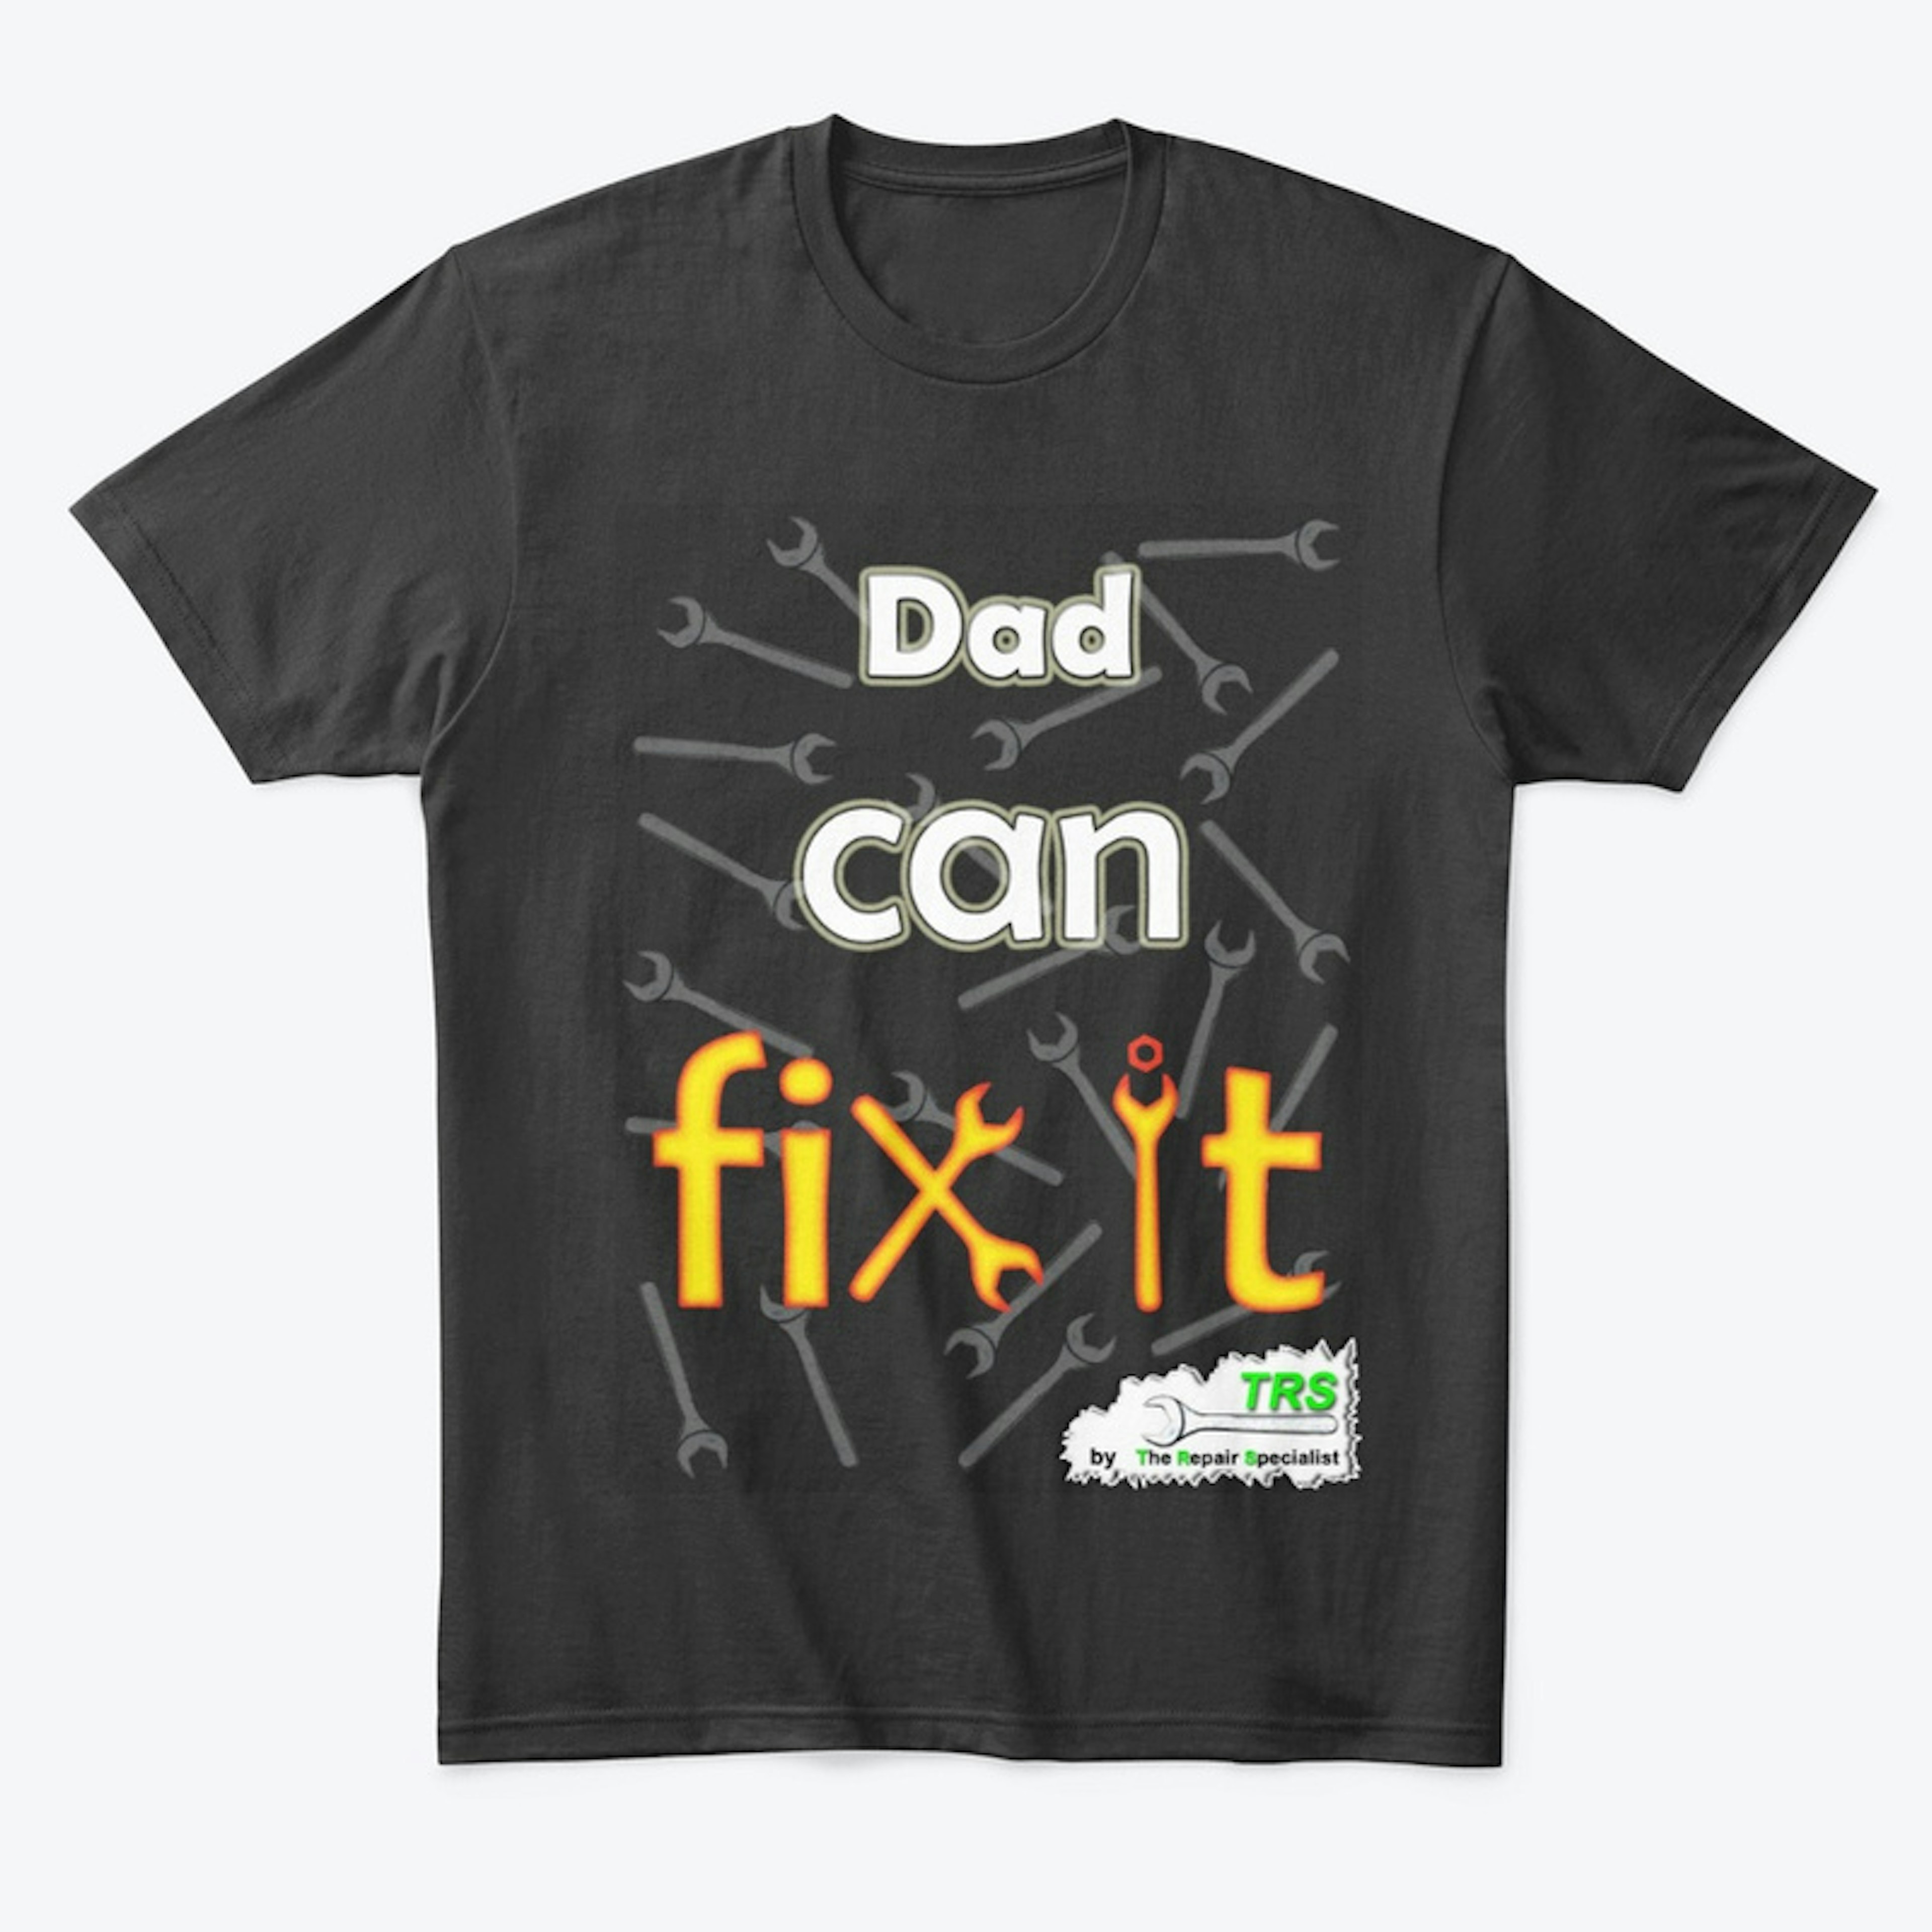 Dad can fix it T-shirt